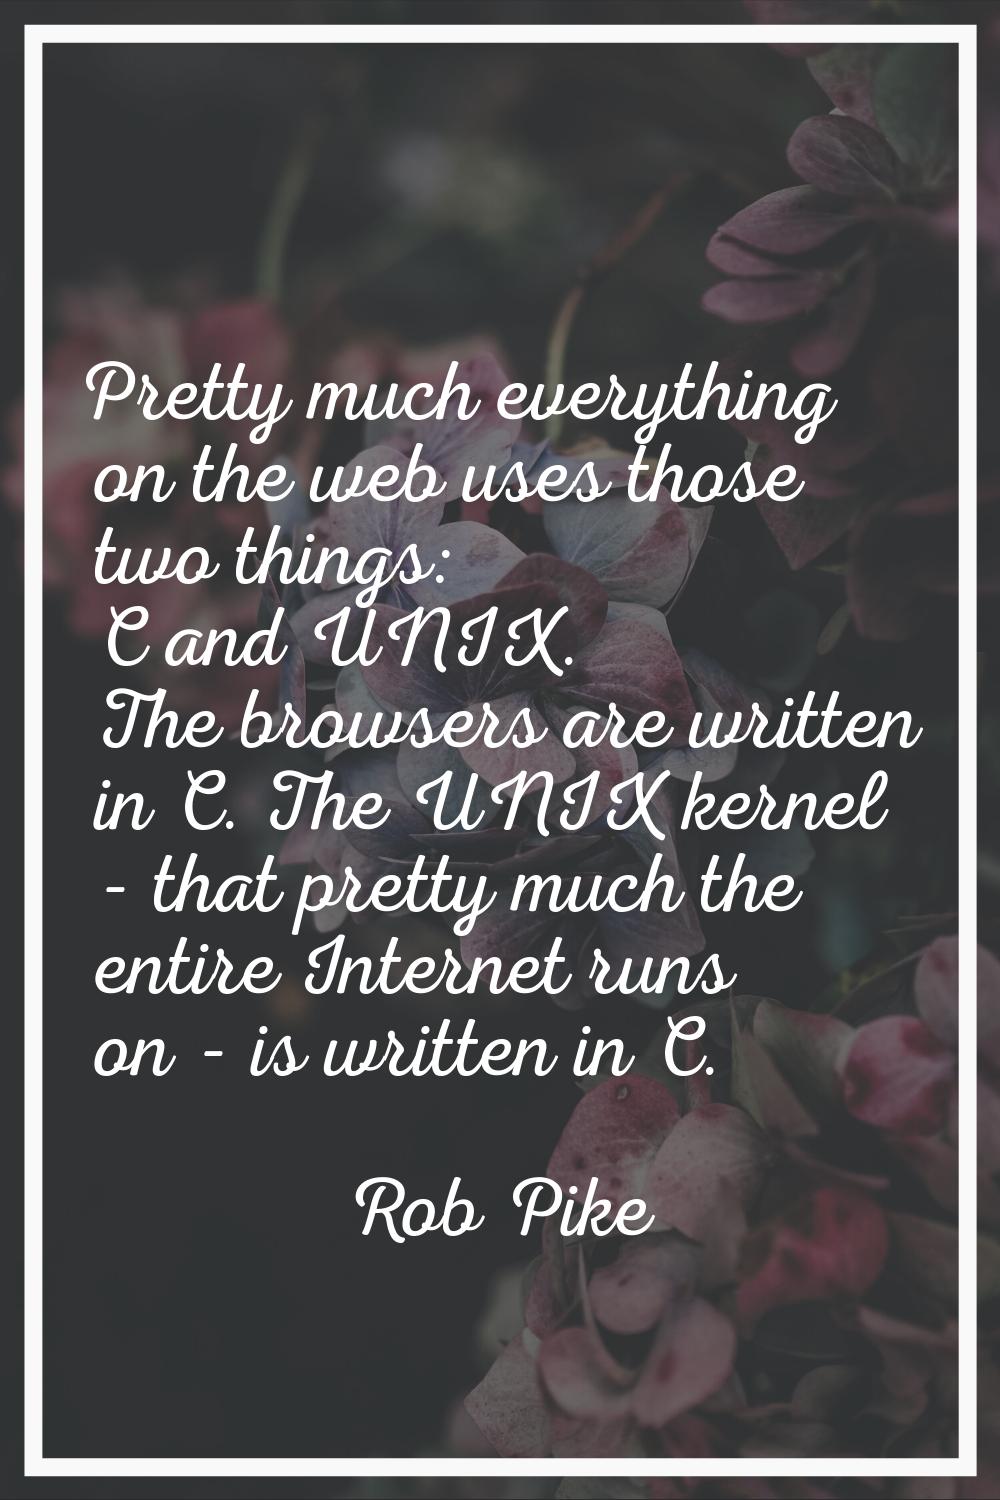 Pretty much everything on the web uses those two things: C and UNIX. The browsers are written in C.